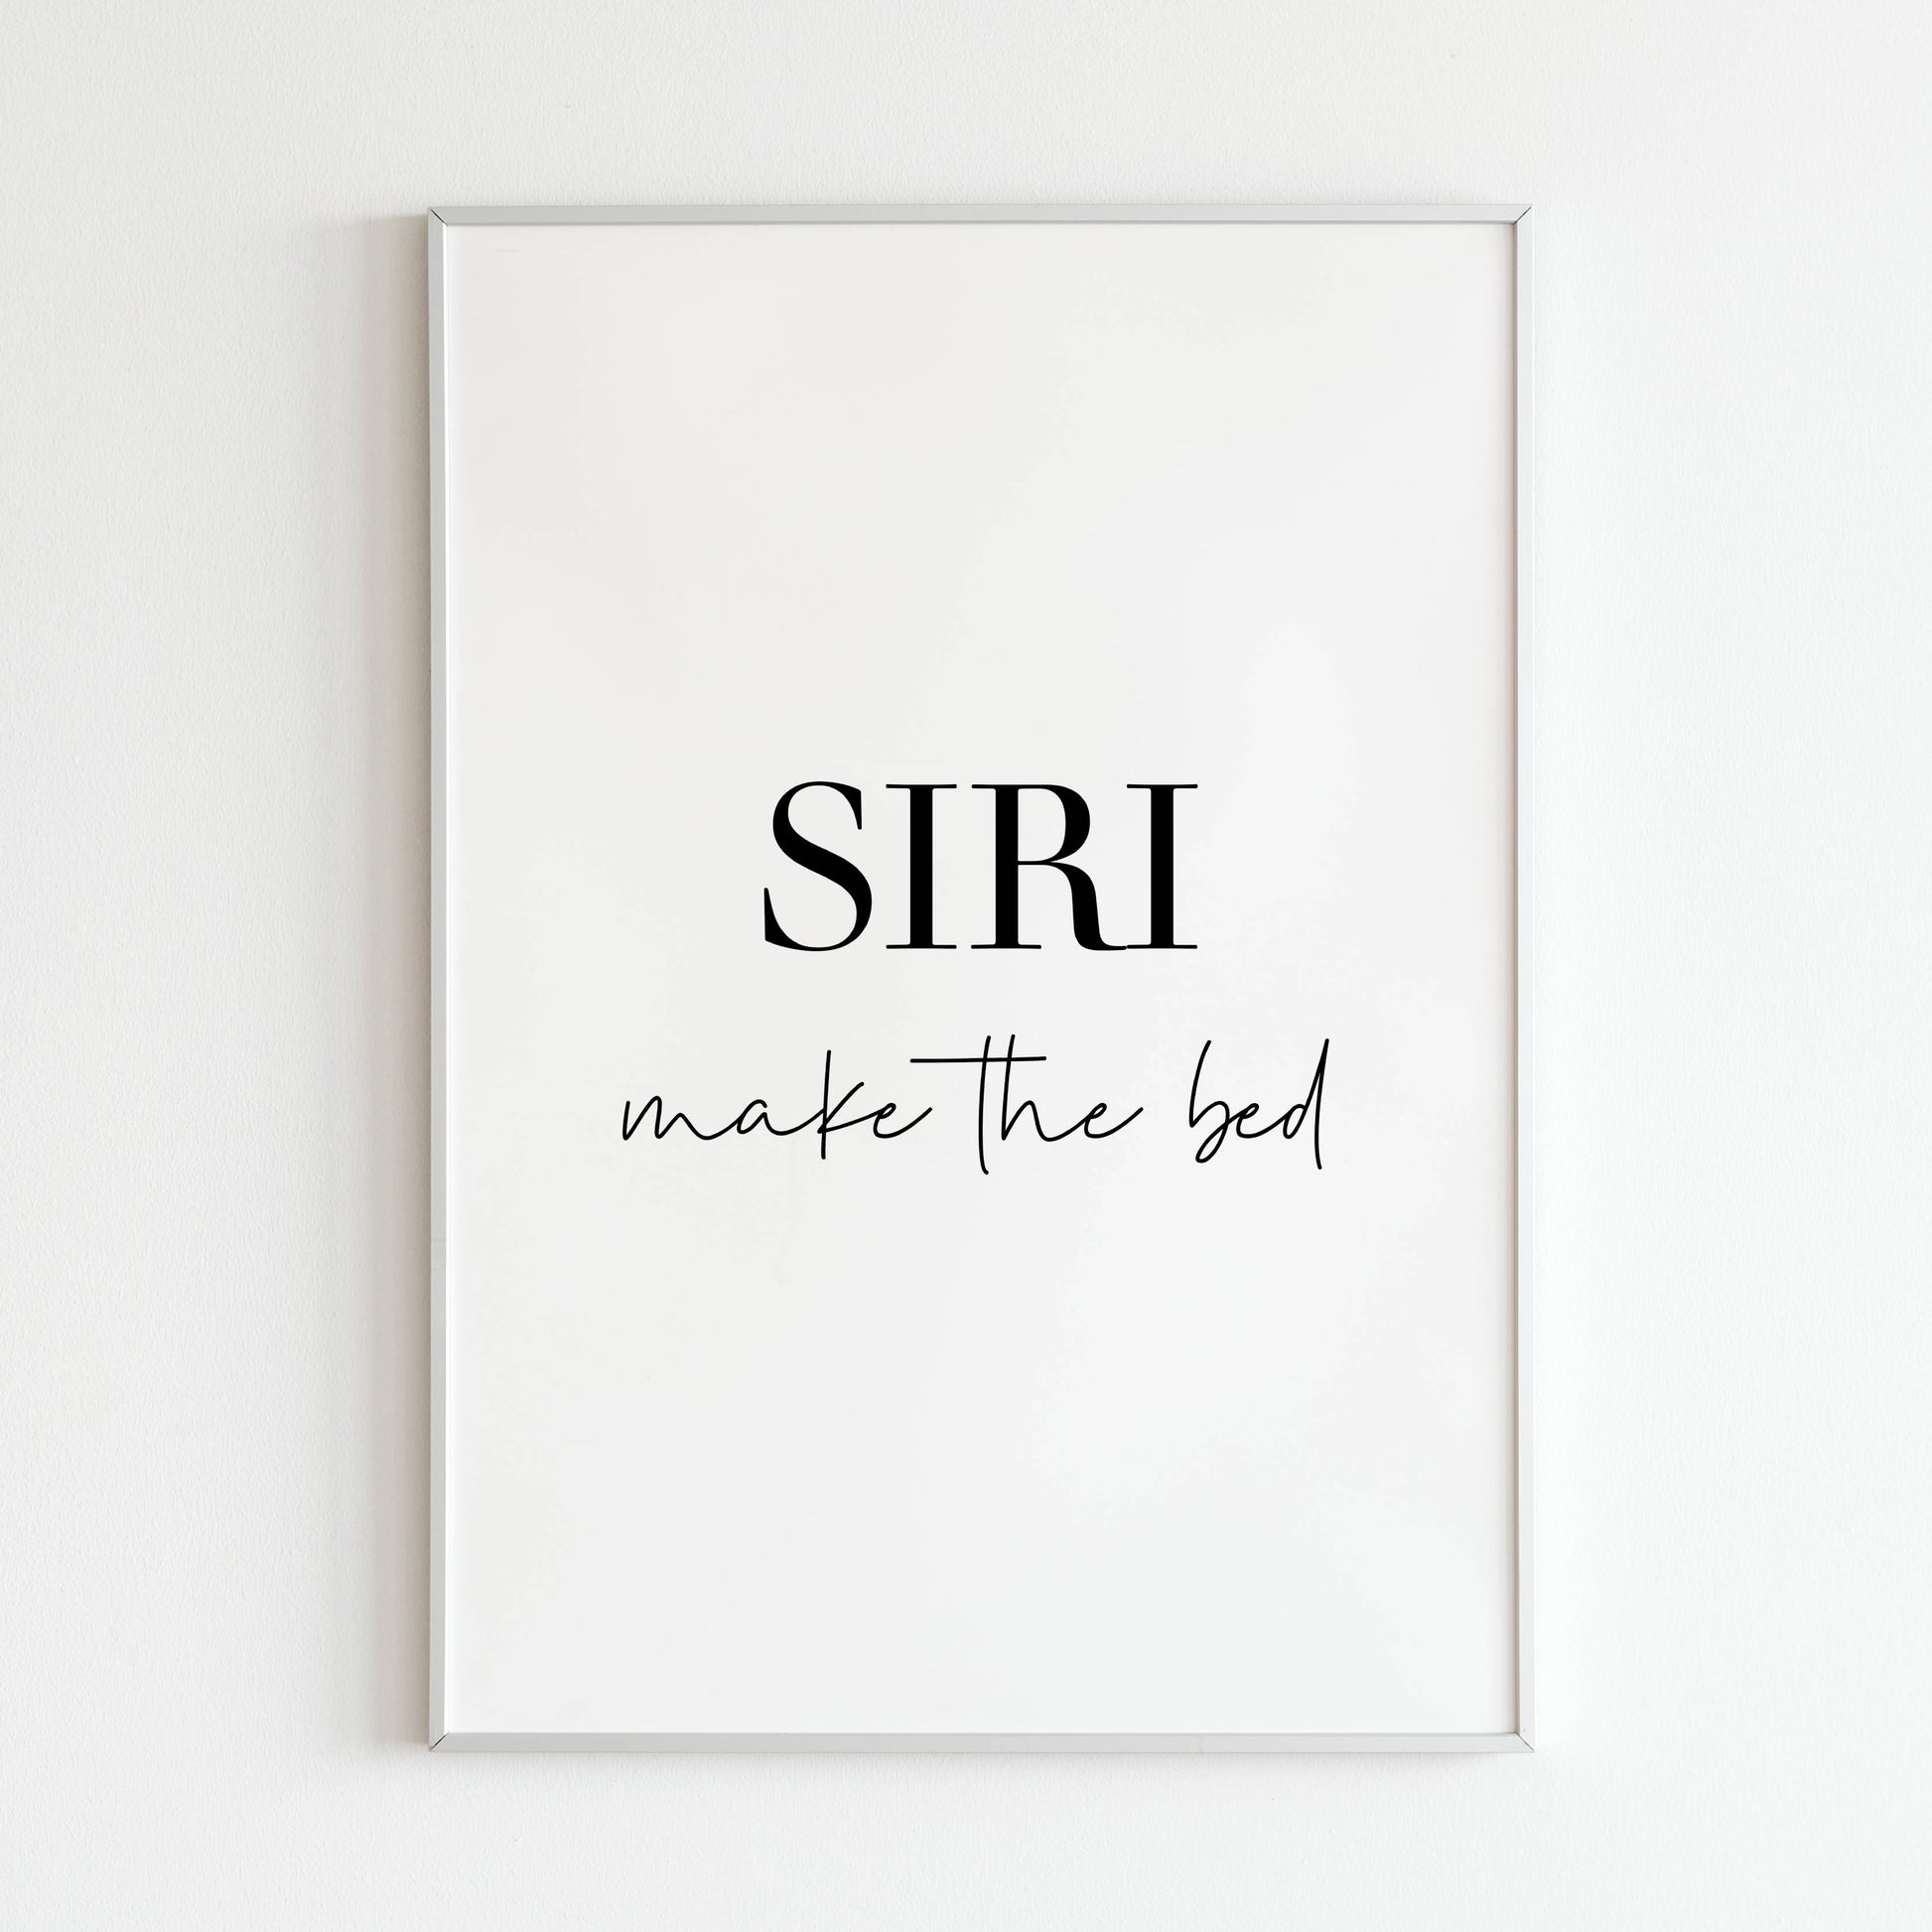 Downloadable "SIRI, make the bed" art print, add a chuckle to your daily routine with a touch of tech humor.Humorous "SIRI, make the bed" printable poster, relatable for anyone who wishes for tech-powered chores.	